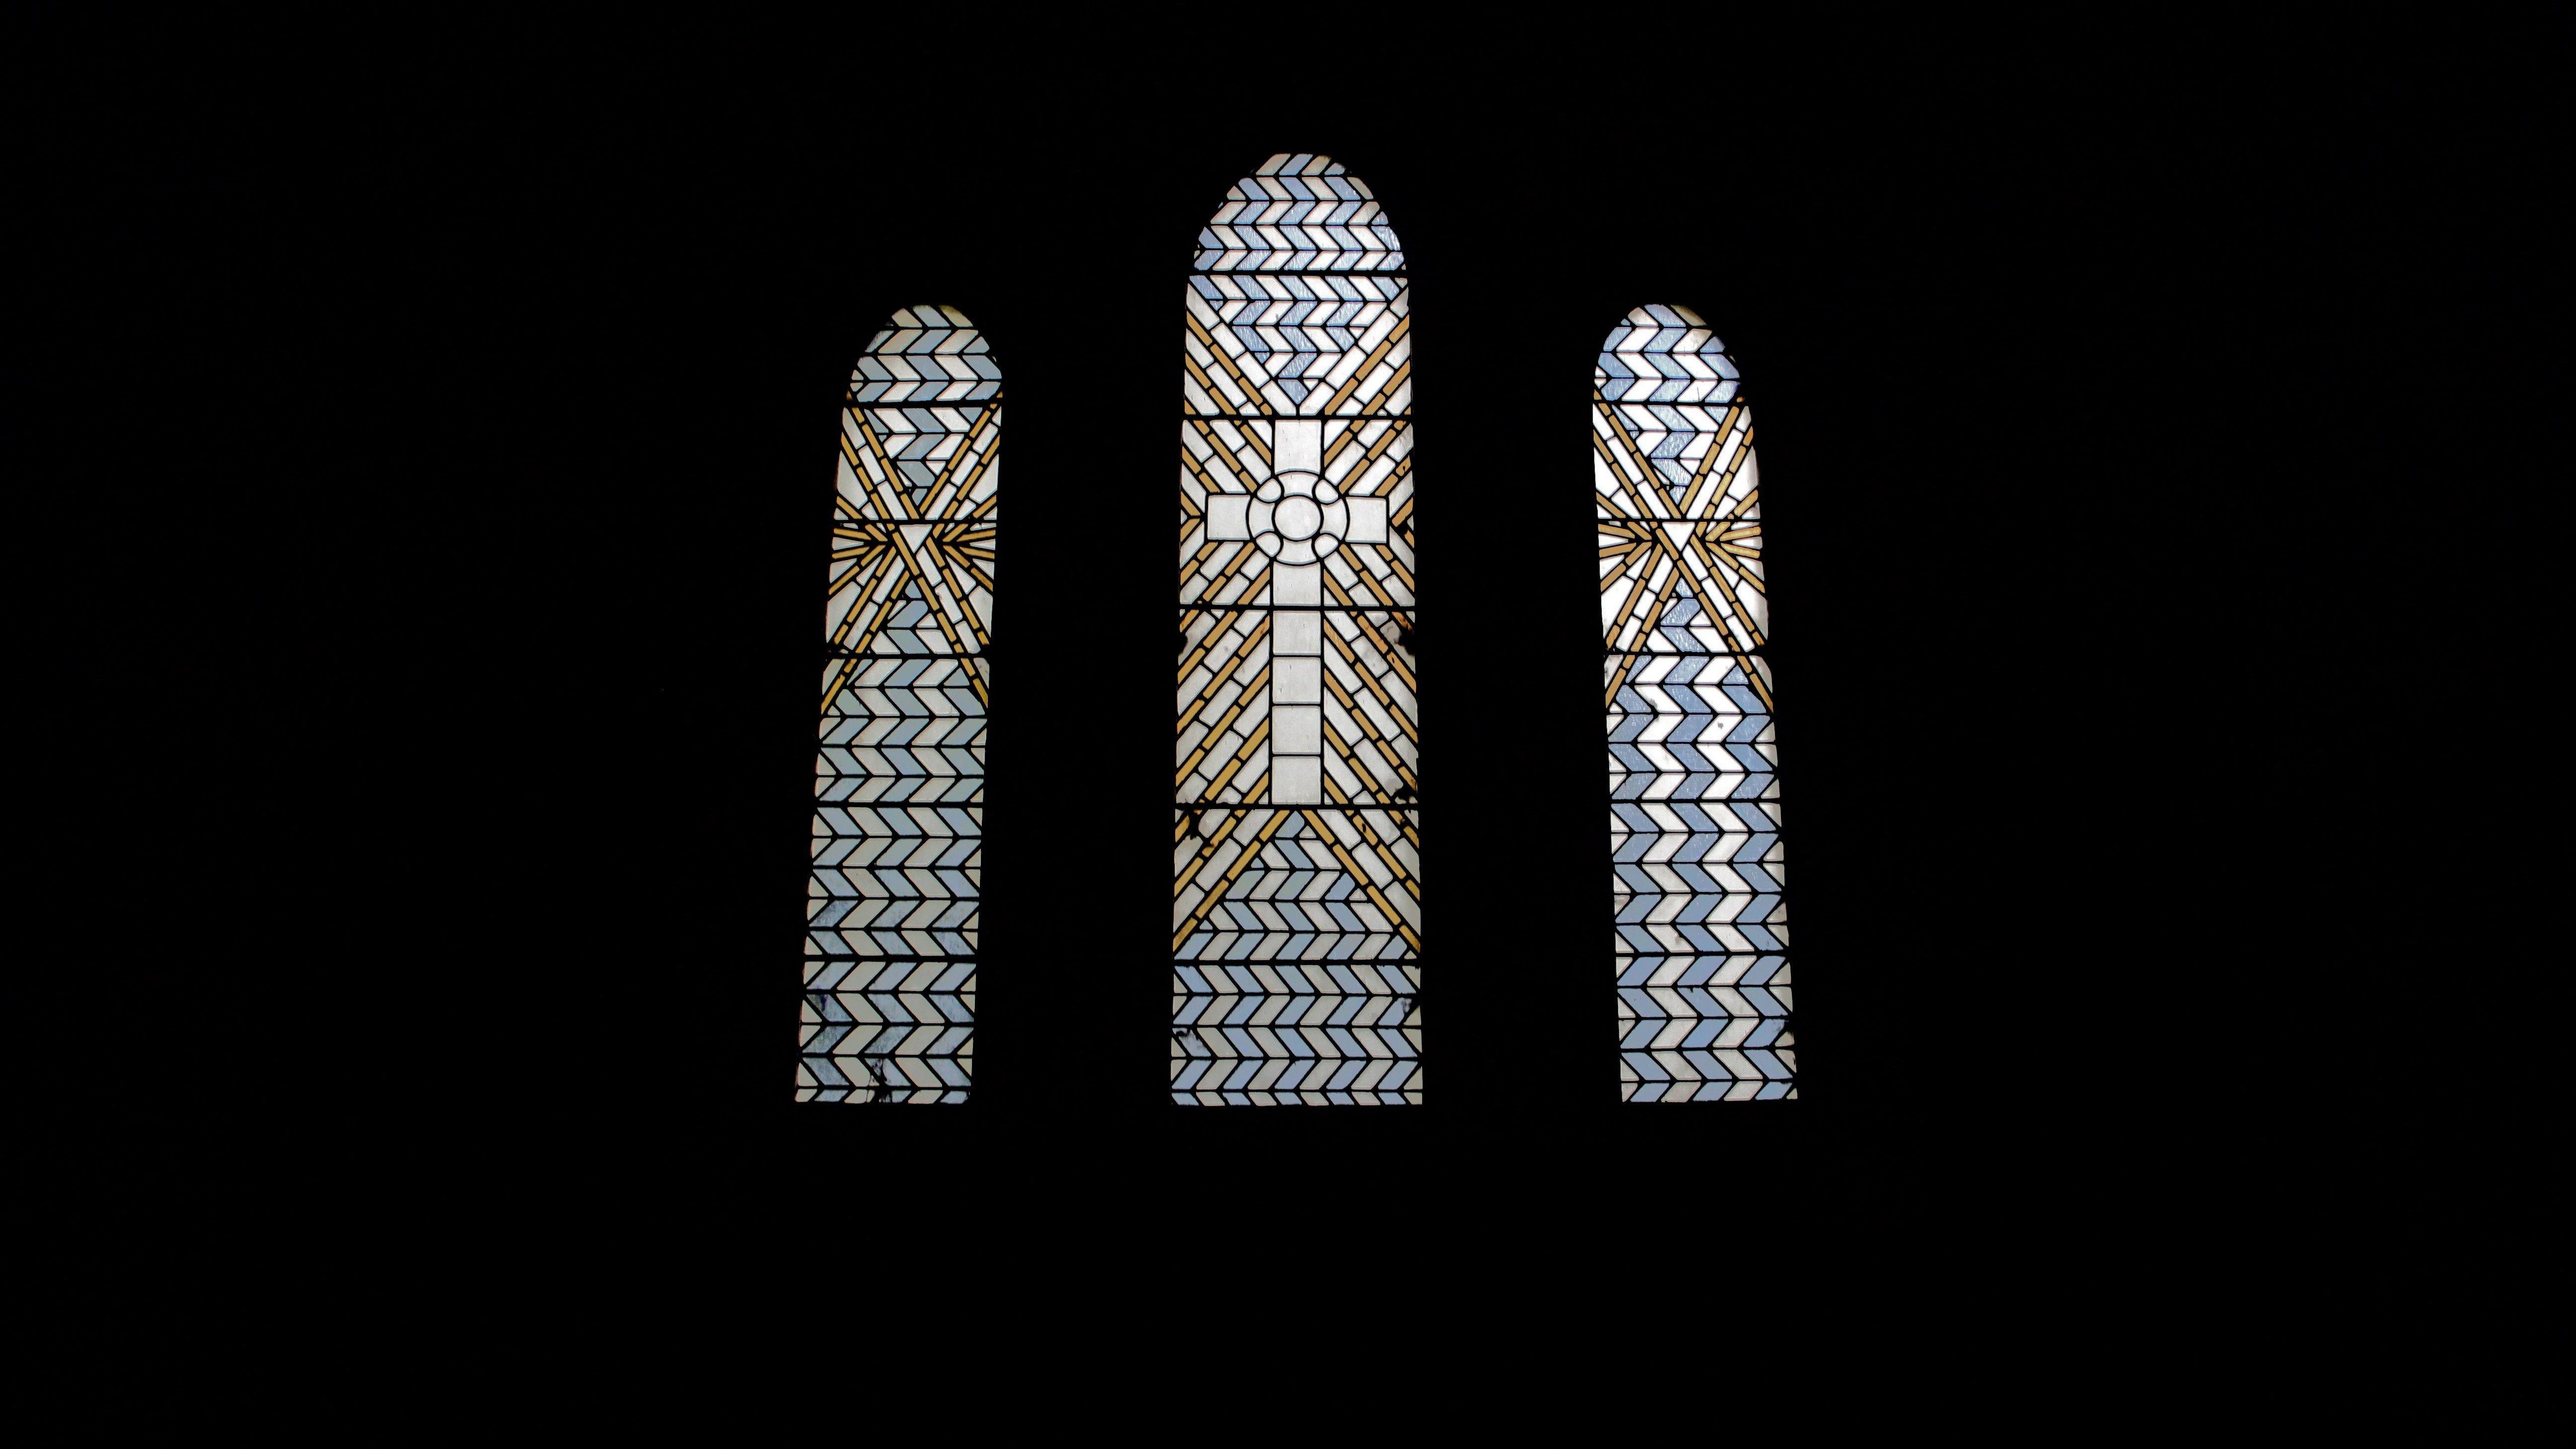 Stained Glass Window Wallpaper